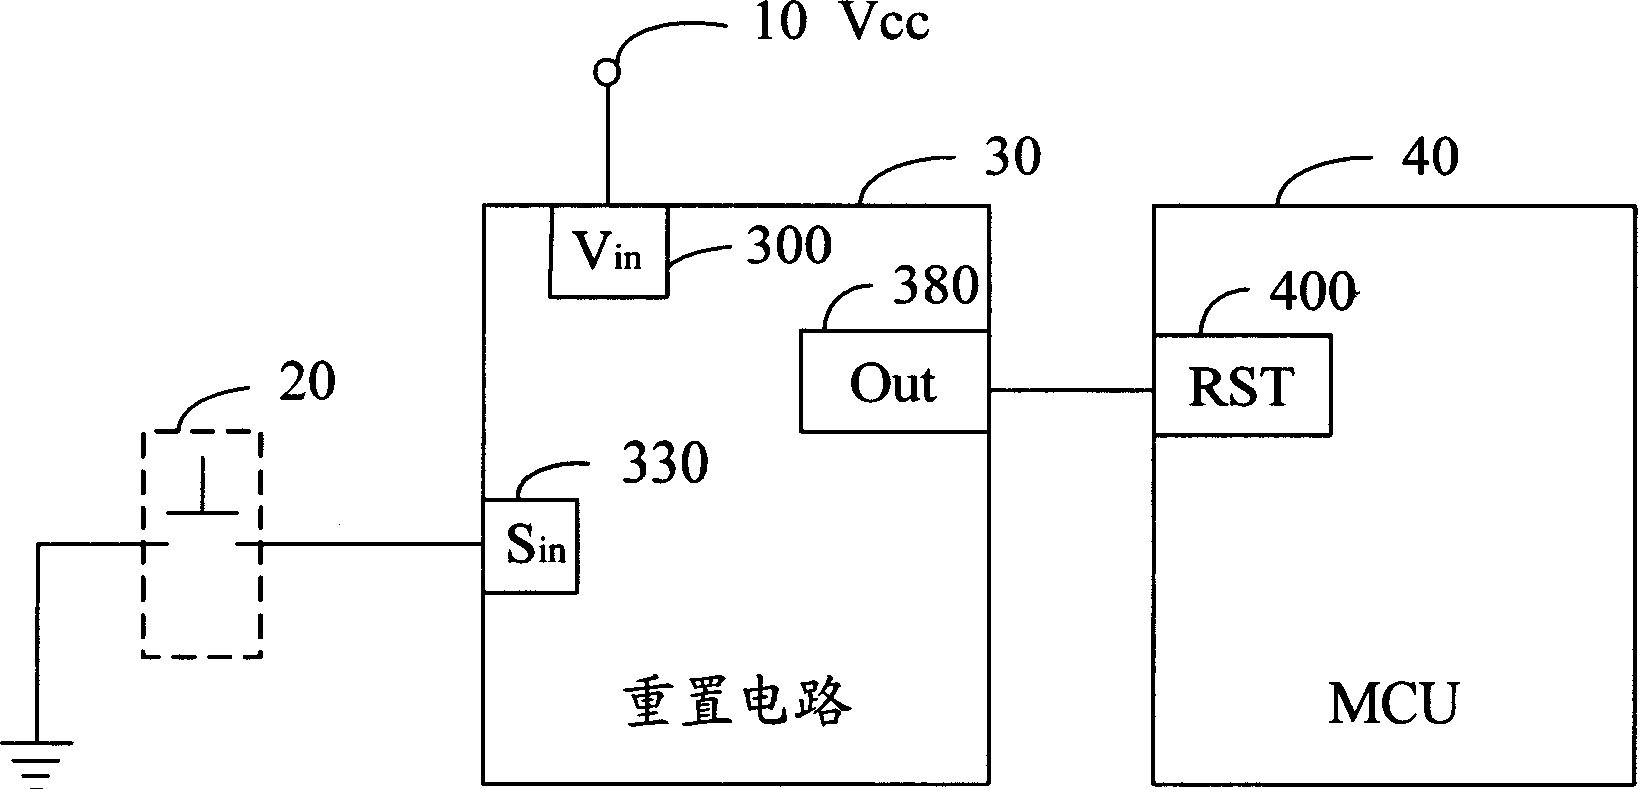 External reset switch and rest circuit